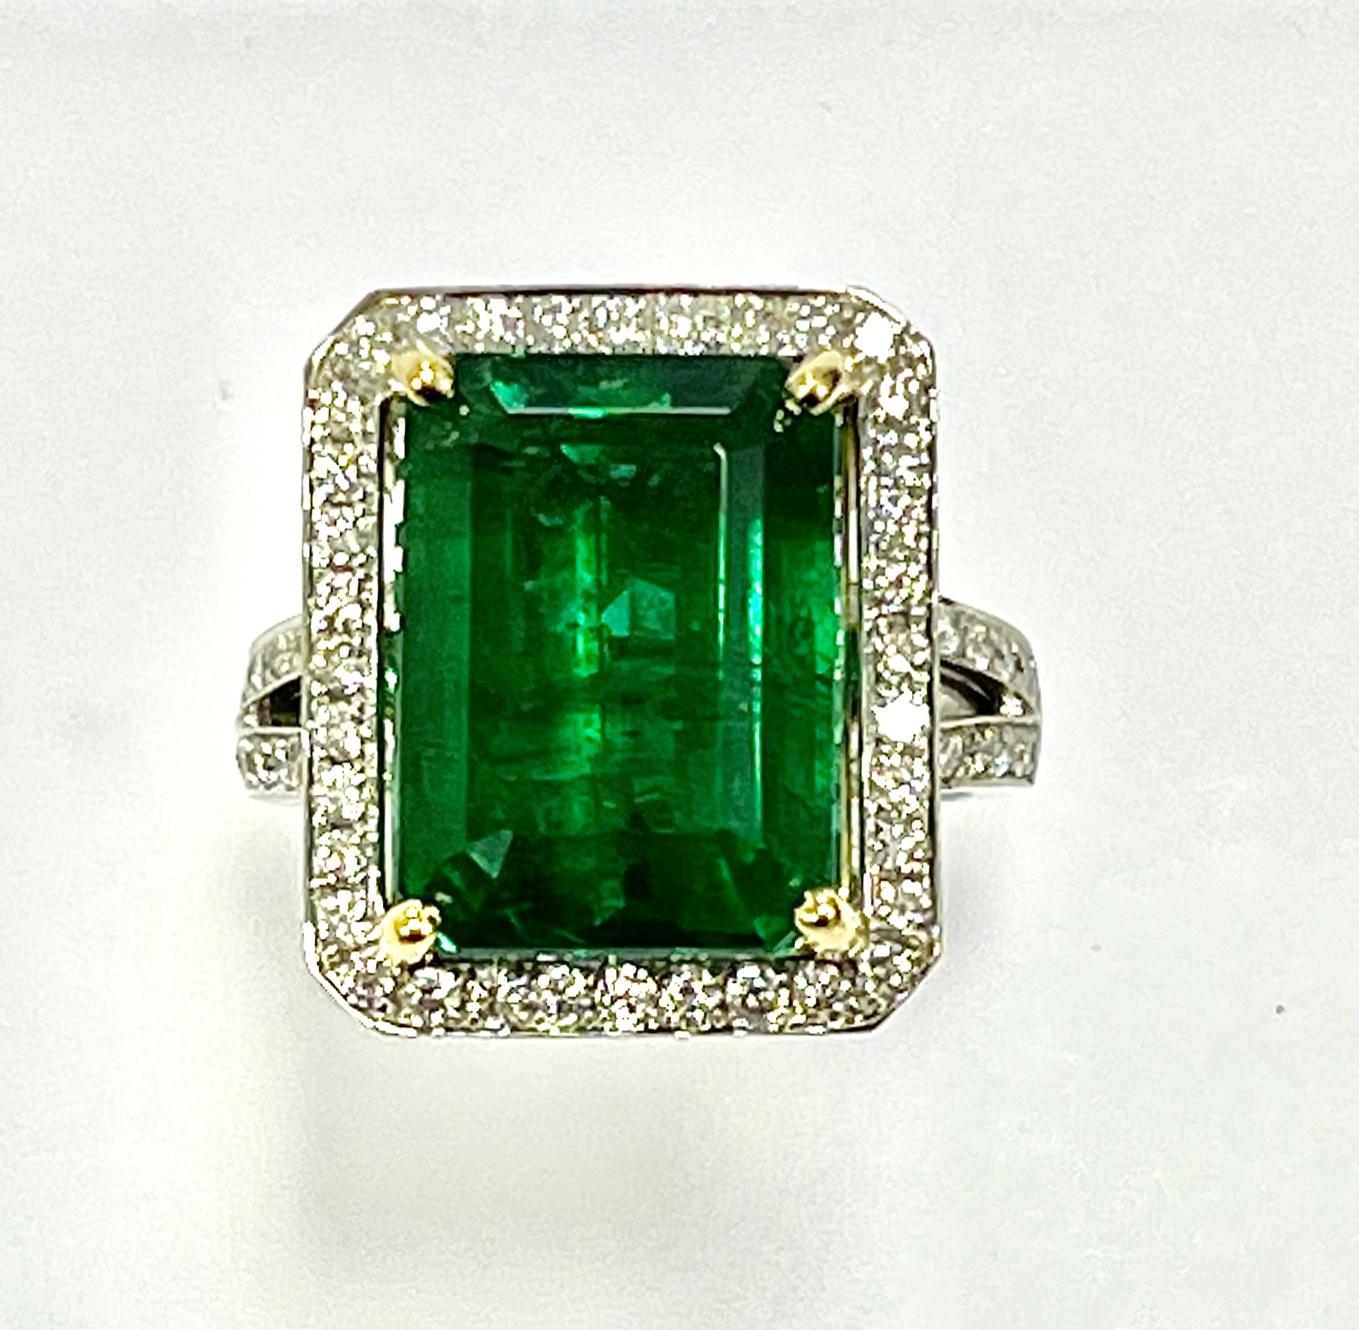 12.12 Carat Emerlad cut emerald set in 18k white gold ring with 1.59 carat diamonds . This item's assessment is based on our opinion.